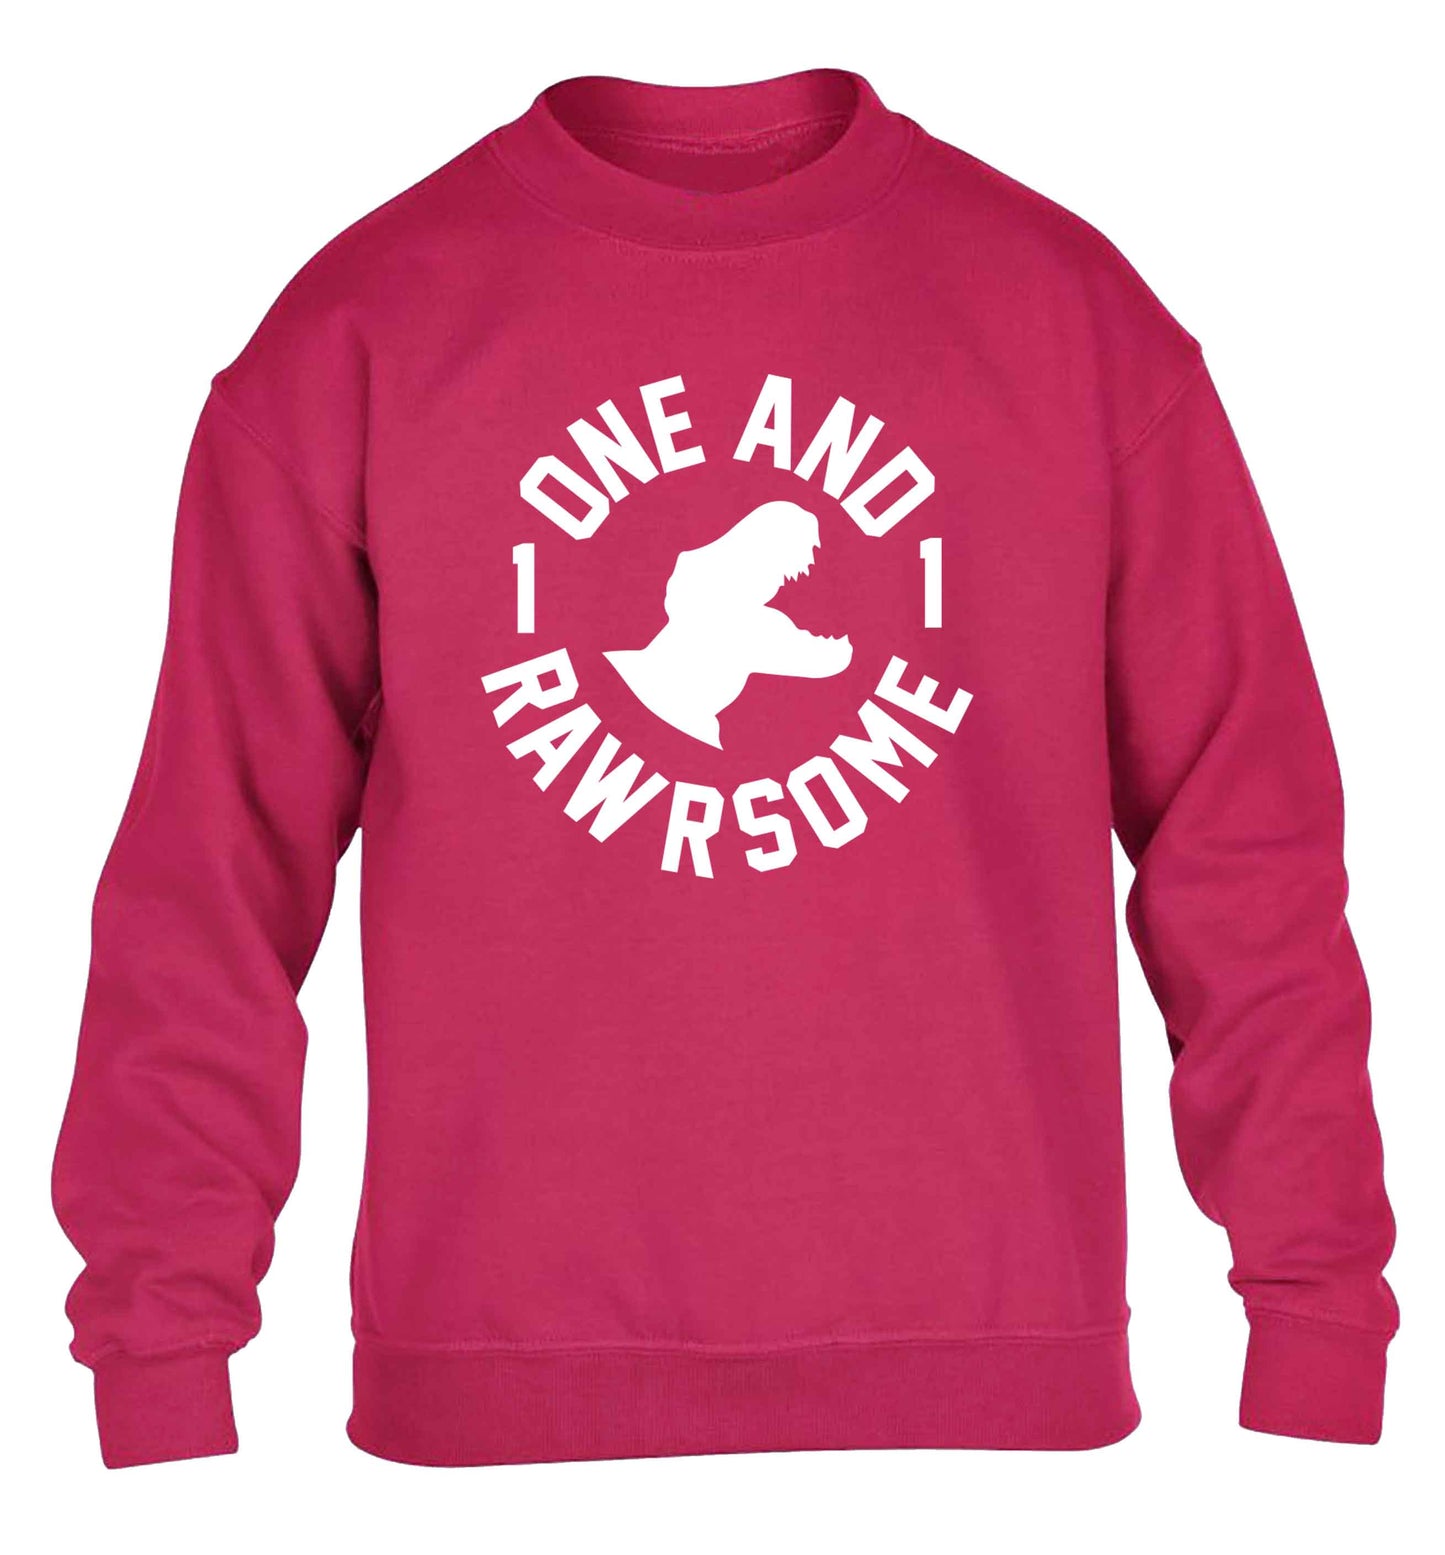 One and Rawrsome children's pink sweater 12-13 Years